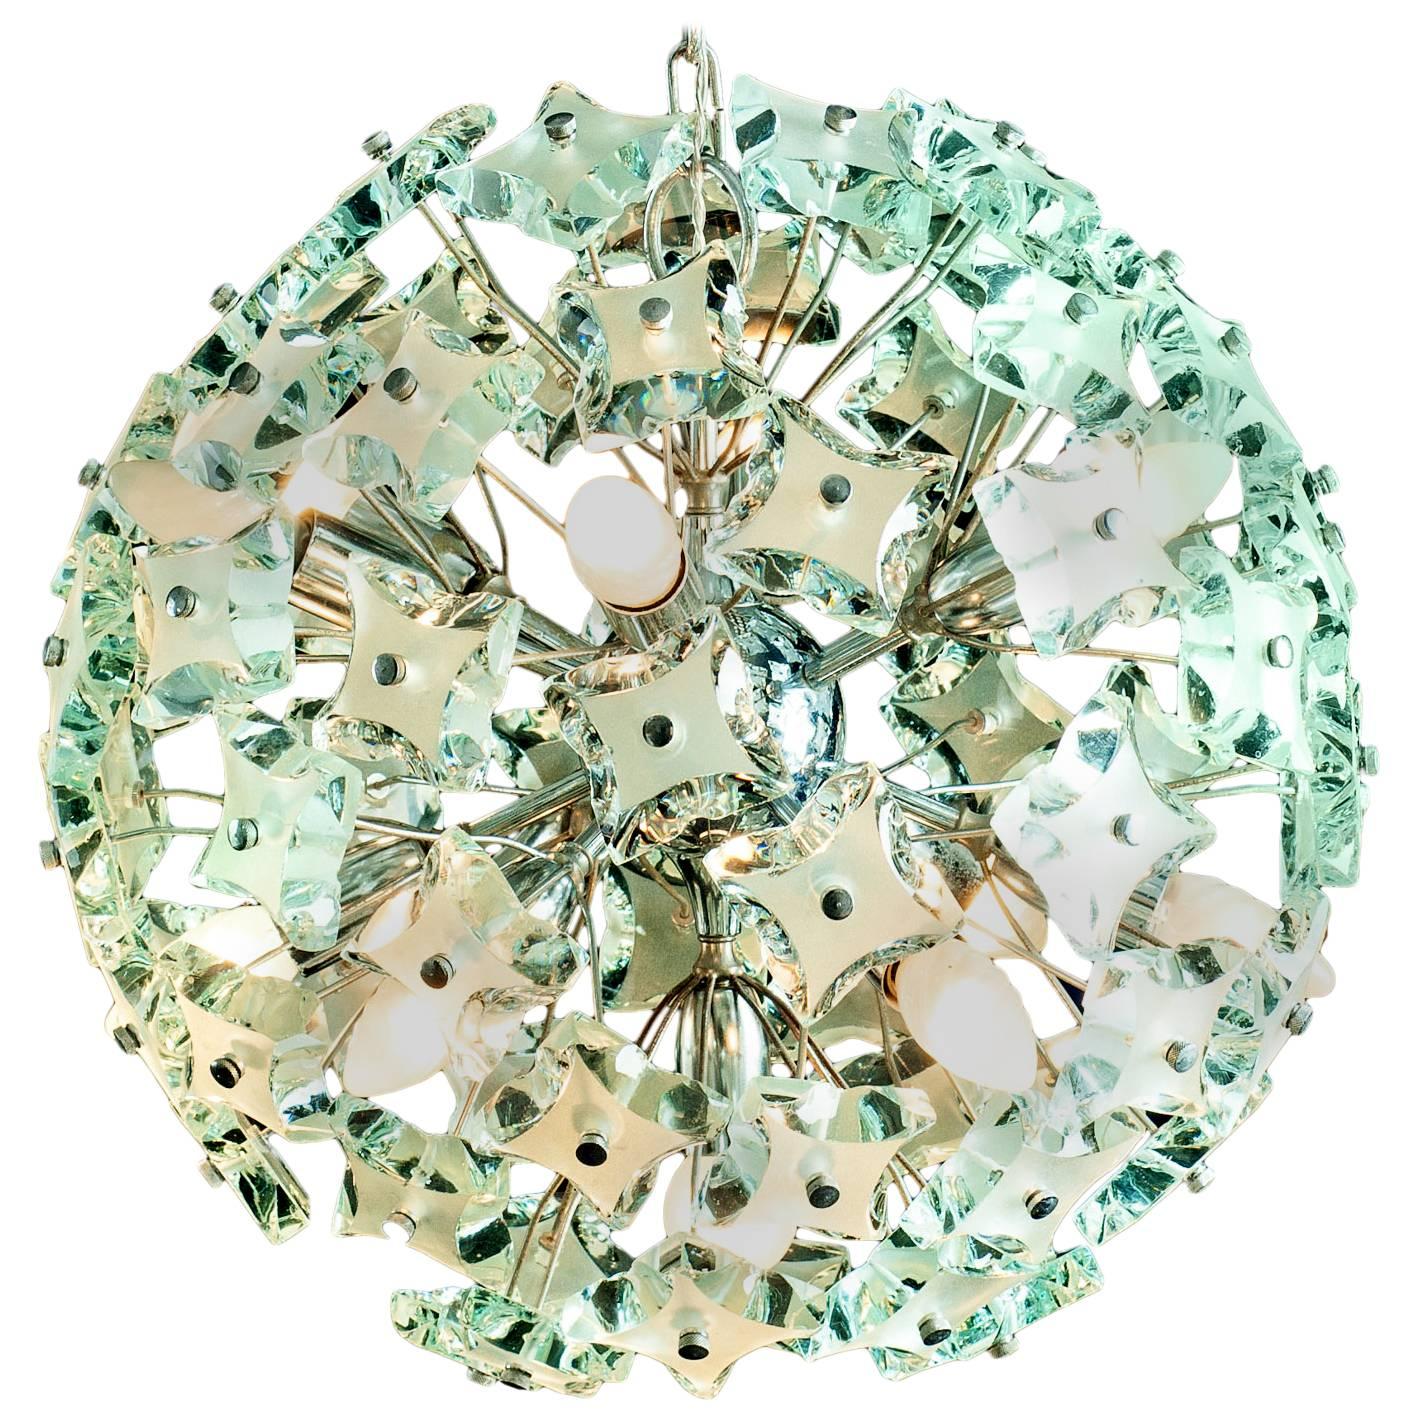 Amazing midcentury Murano glass sputnik chandelier in the style of Fontana Arte, circa 1960's. Chrome frame with green colored cut-glass.